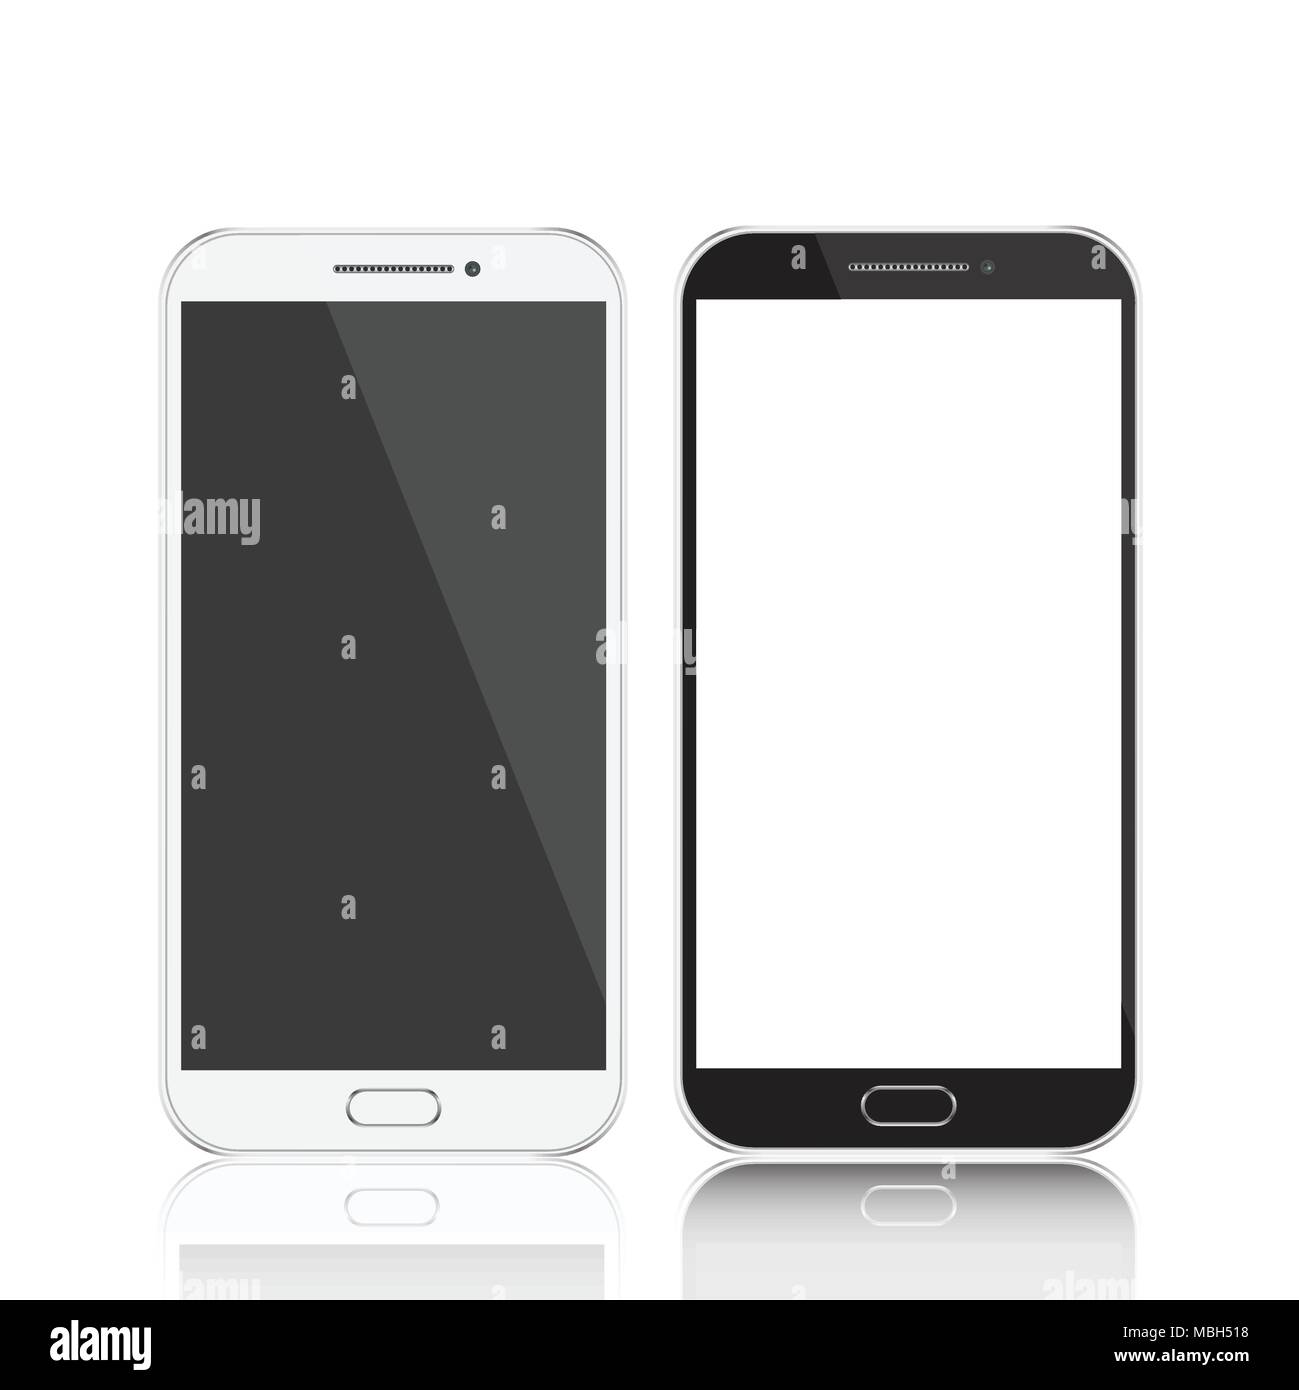 Smartphones black and white. Smartphone isolated. Vector illustration Stock Vector